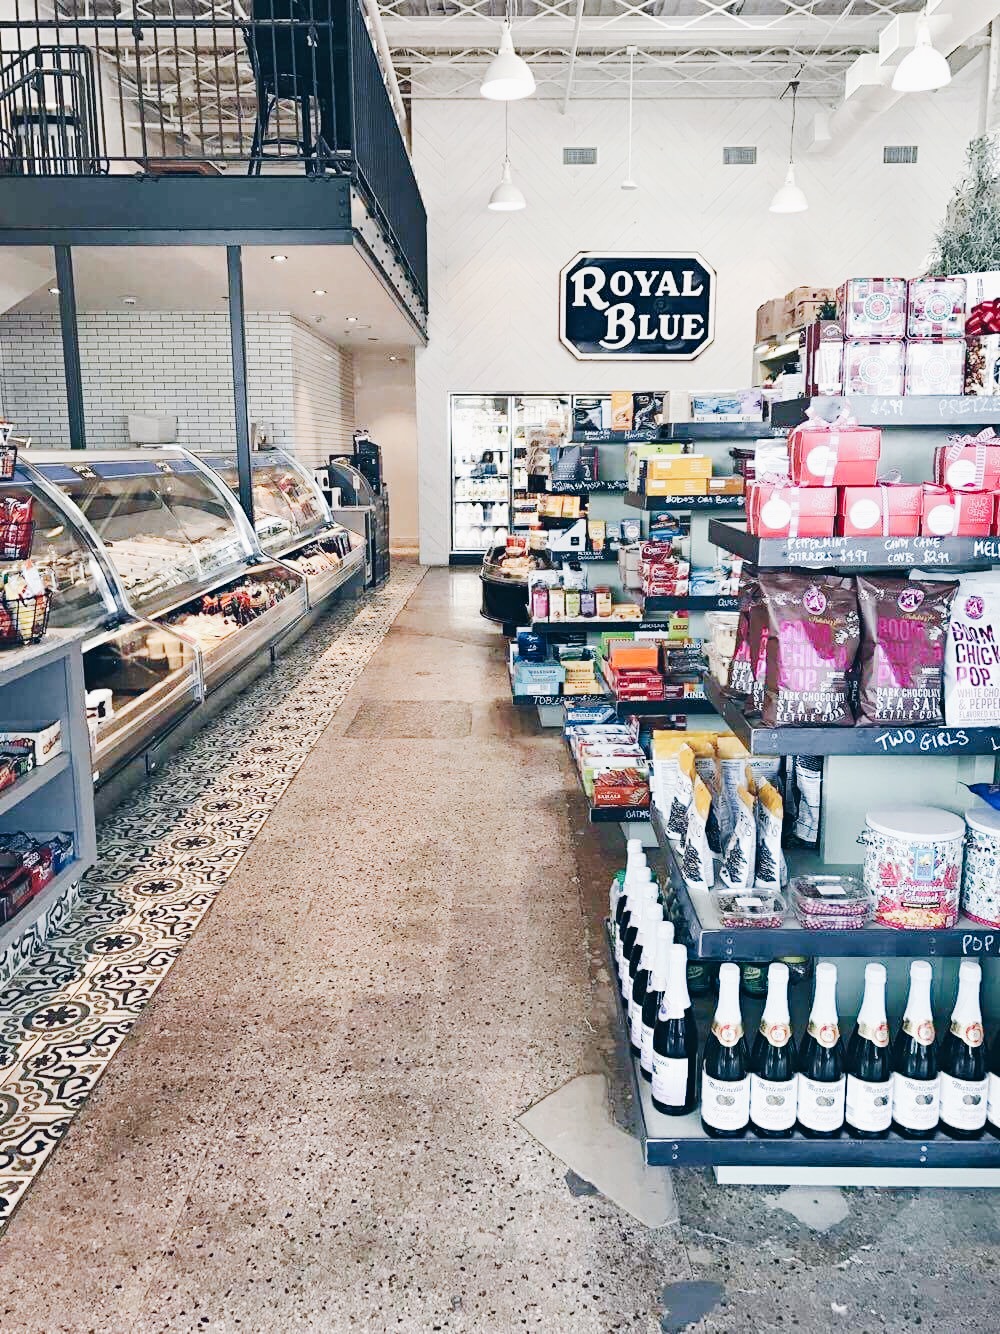 Blogger Hoang-Kim of Color & Chic visits her favorite spot in Dallas, Royal Blue Grocery